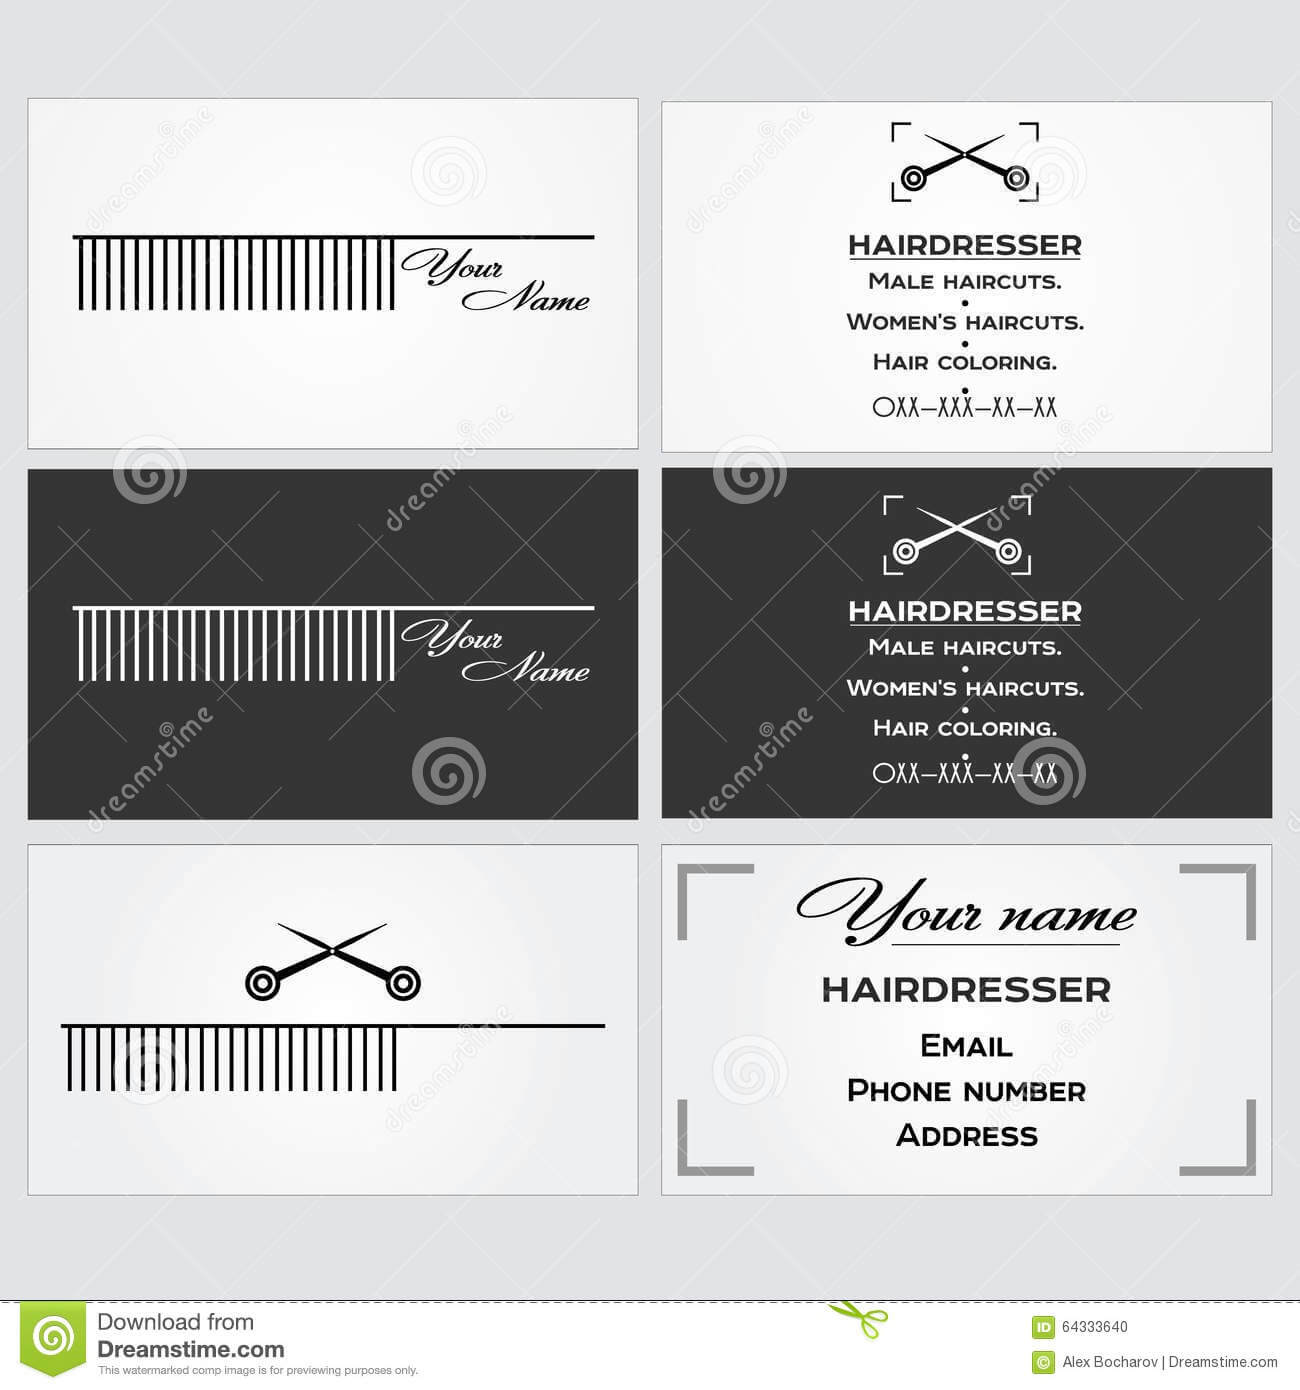 Hairdresser Business Card Templates Free - Calep.midnightpig.co Intended For Hairdresser Business Card Templates Free